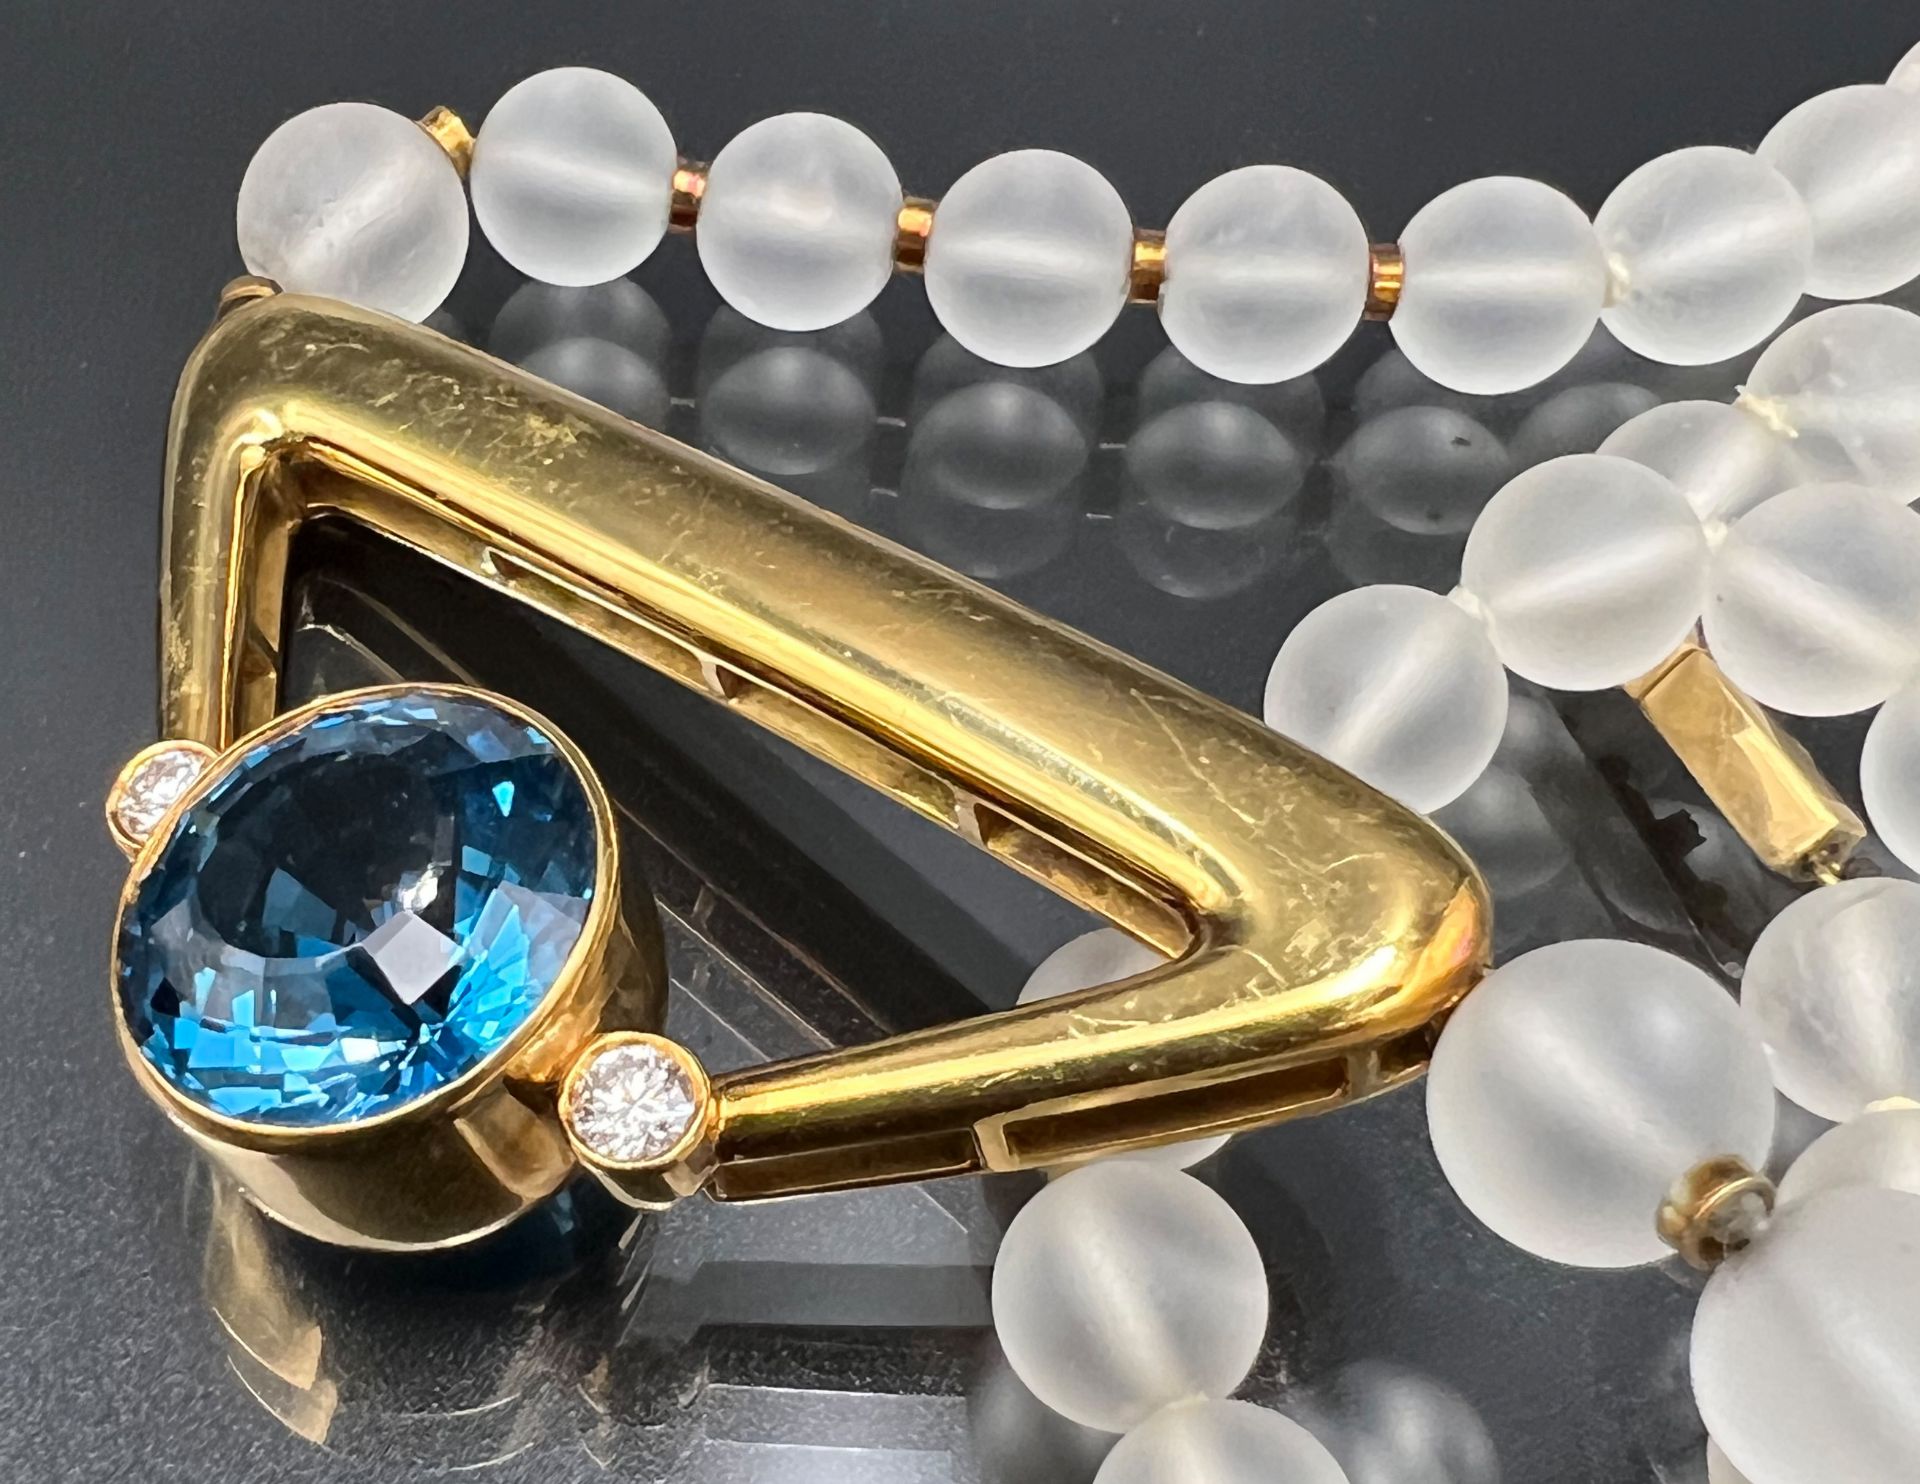 Necklace with rock crystal balls. Centrepiece 750 yellow gold with one topaz and two brilliants. - Image 9 of 18